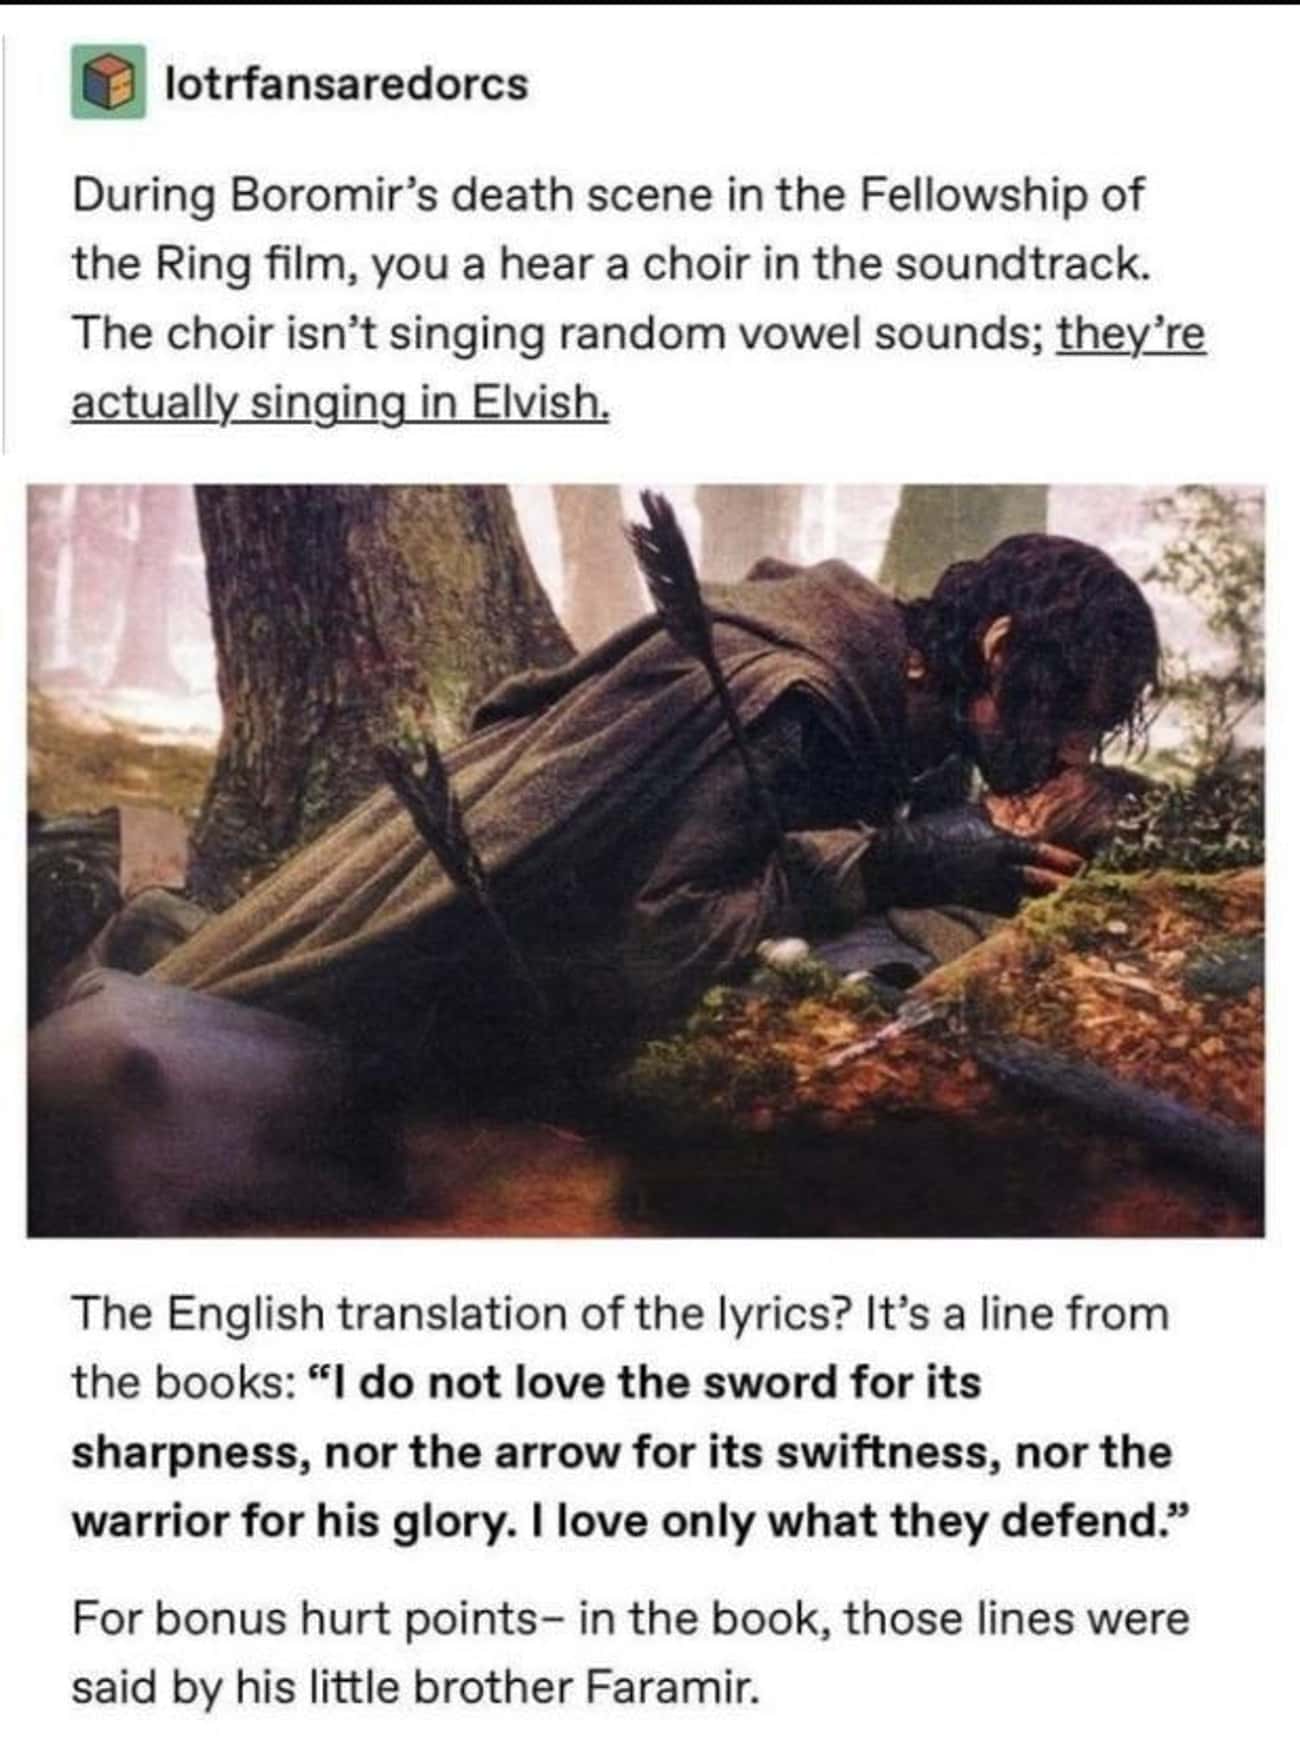 An Elvish Song Plays In The Background Of Boromir's Death